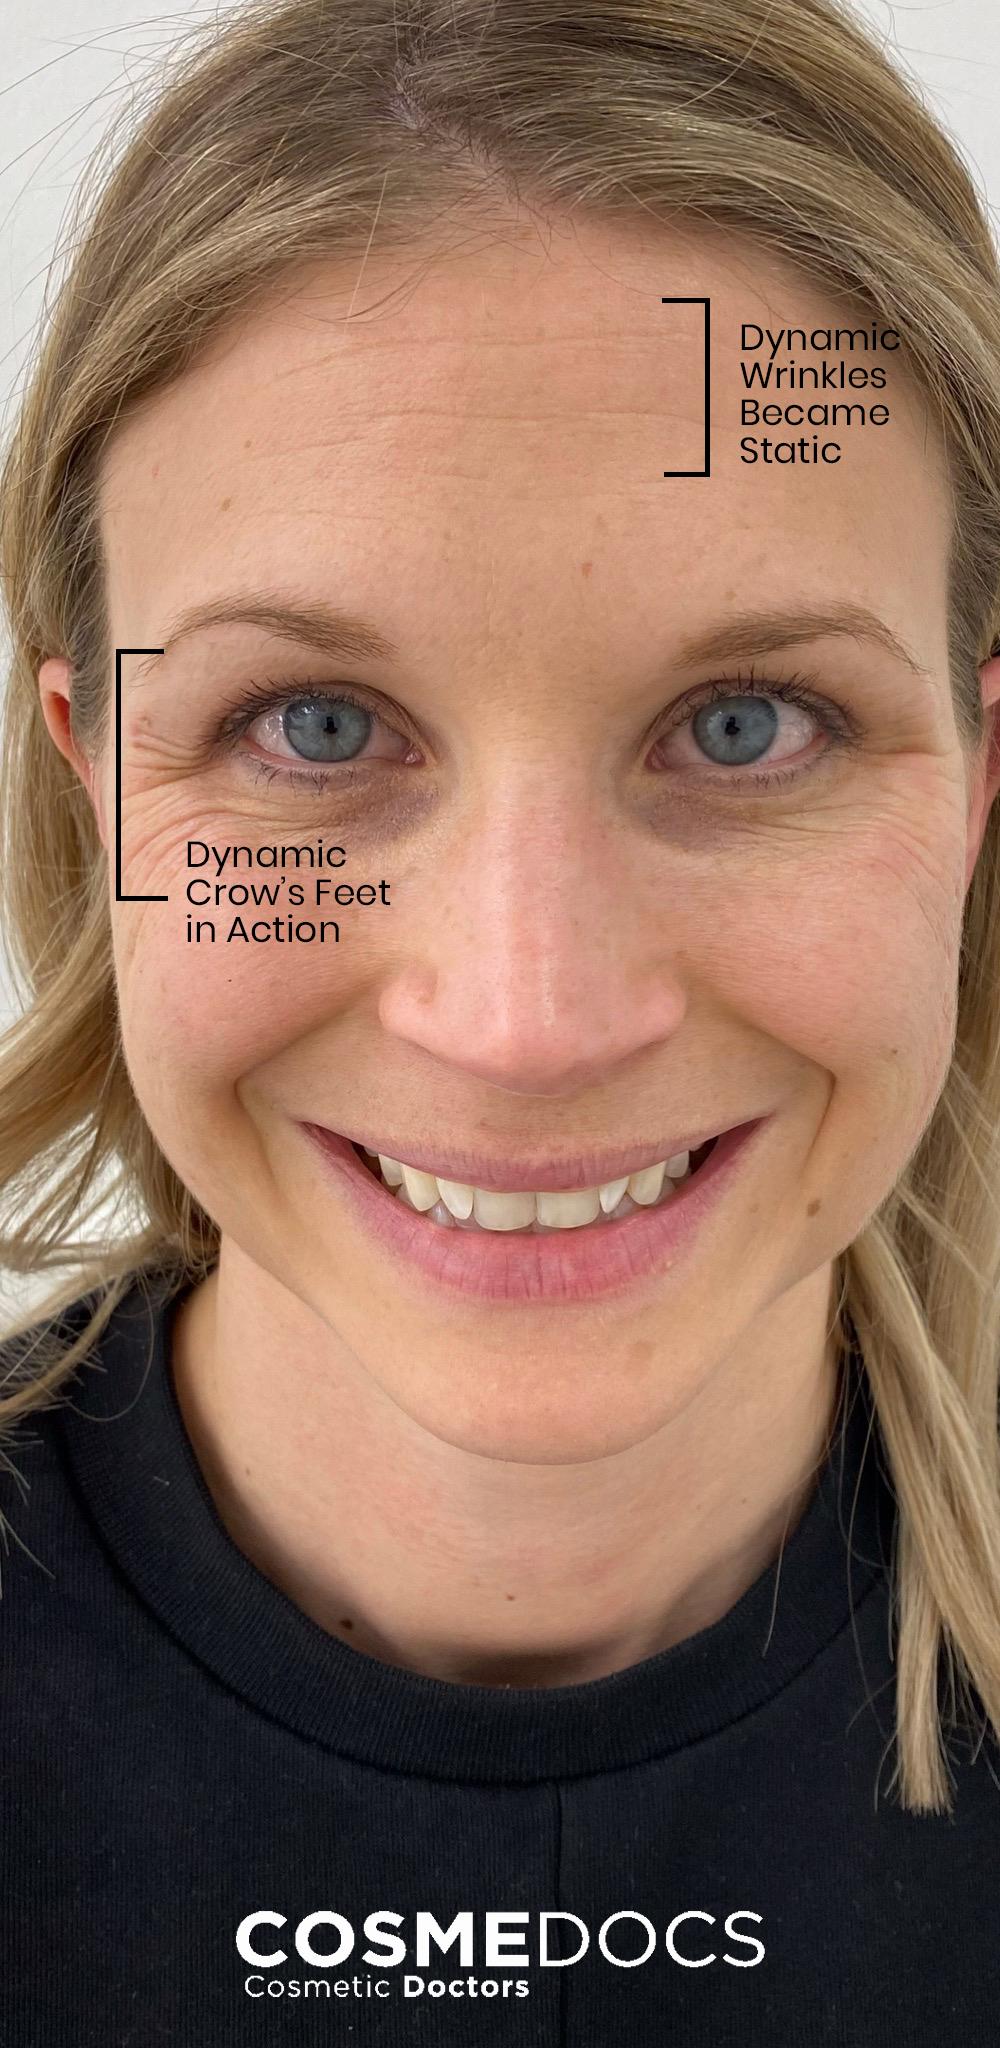 The image shows a womans face with dynamic wrinkles and crows feet.